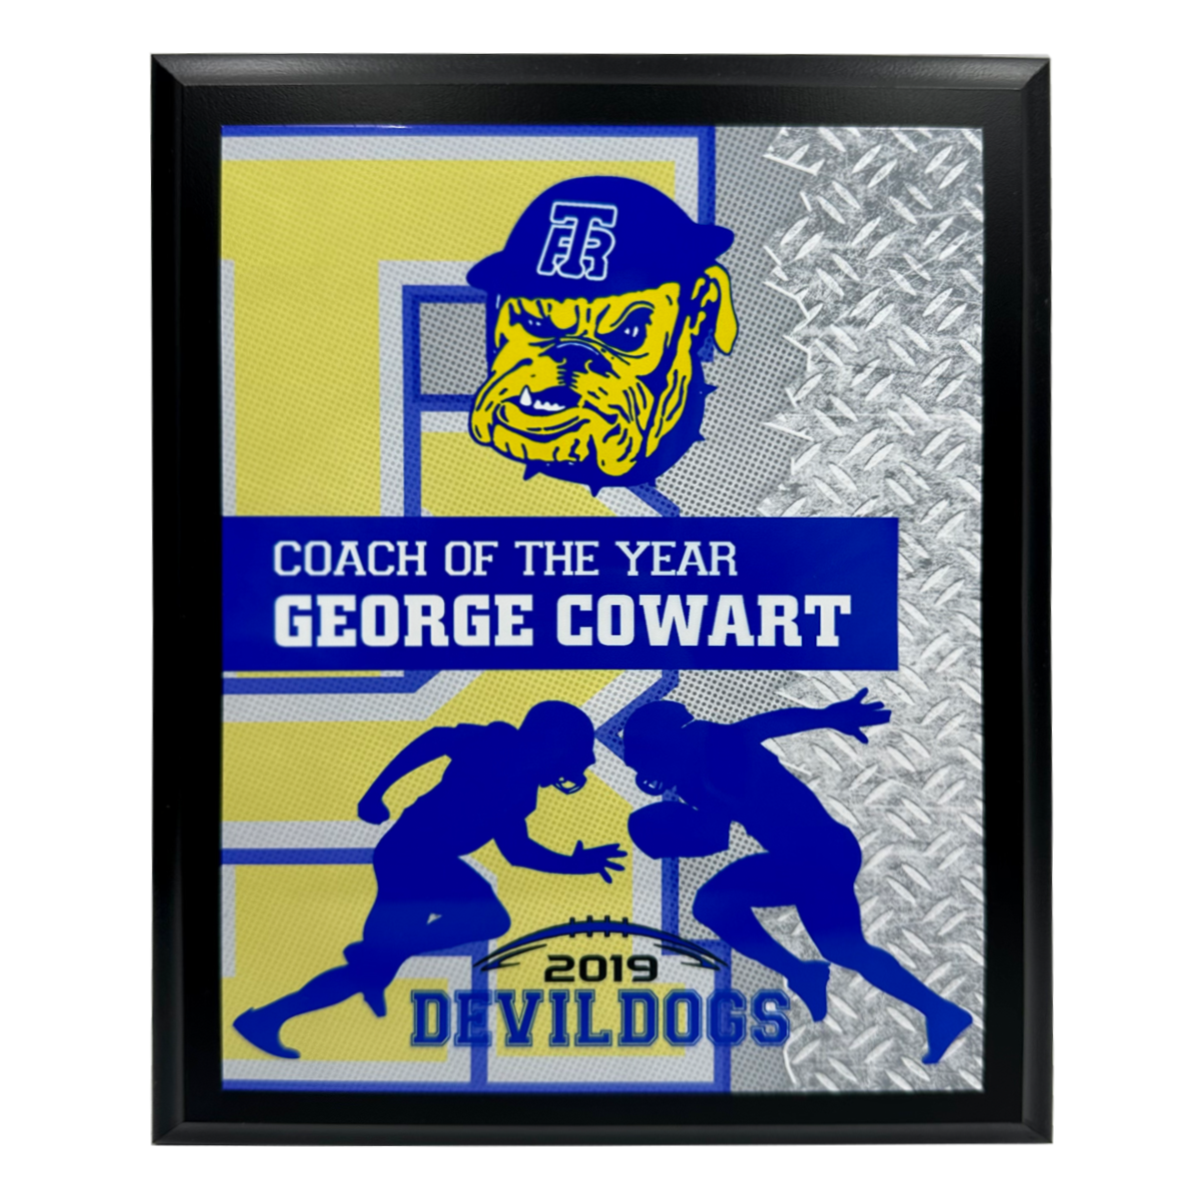 100 Series Plaque in Black or Walnut Finish Board with Full Color Sublimated Plate